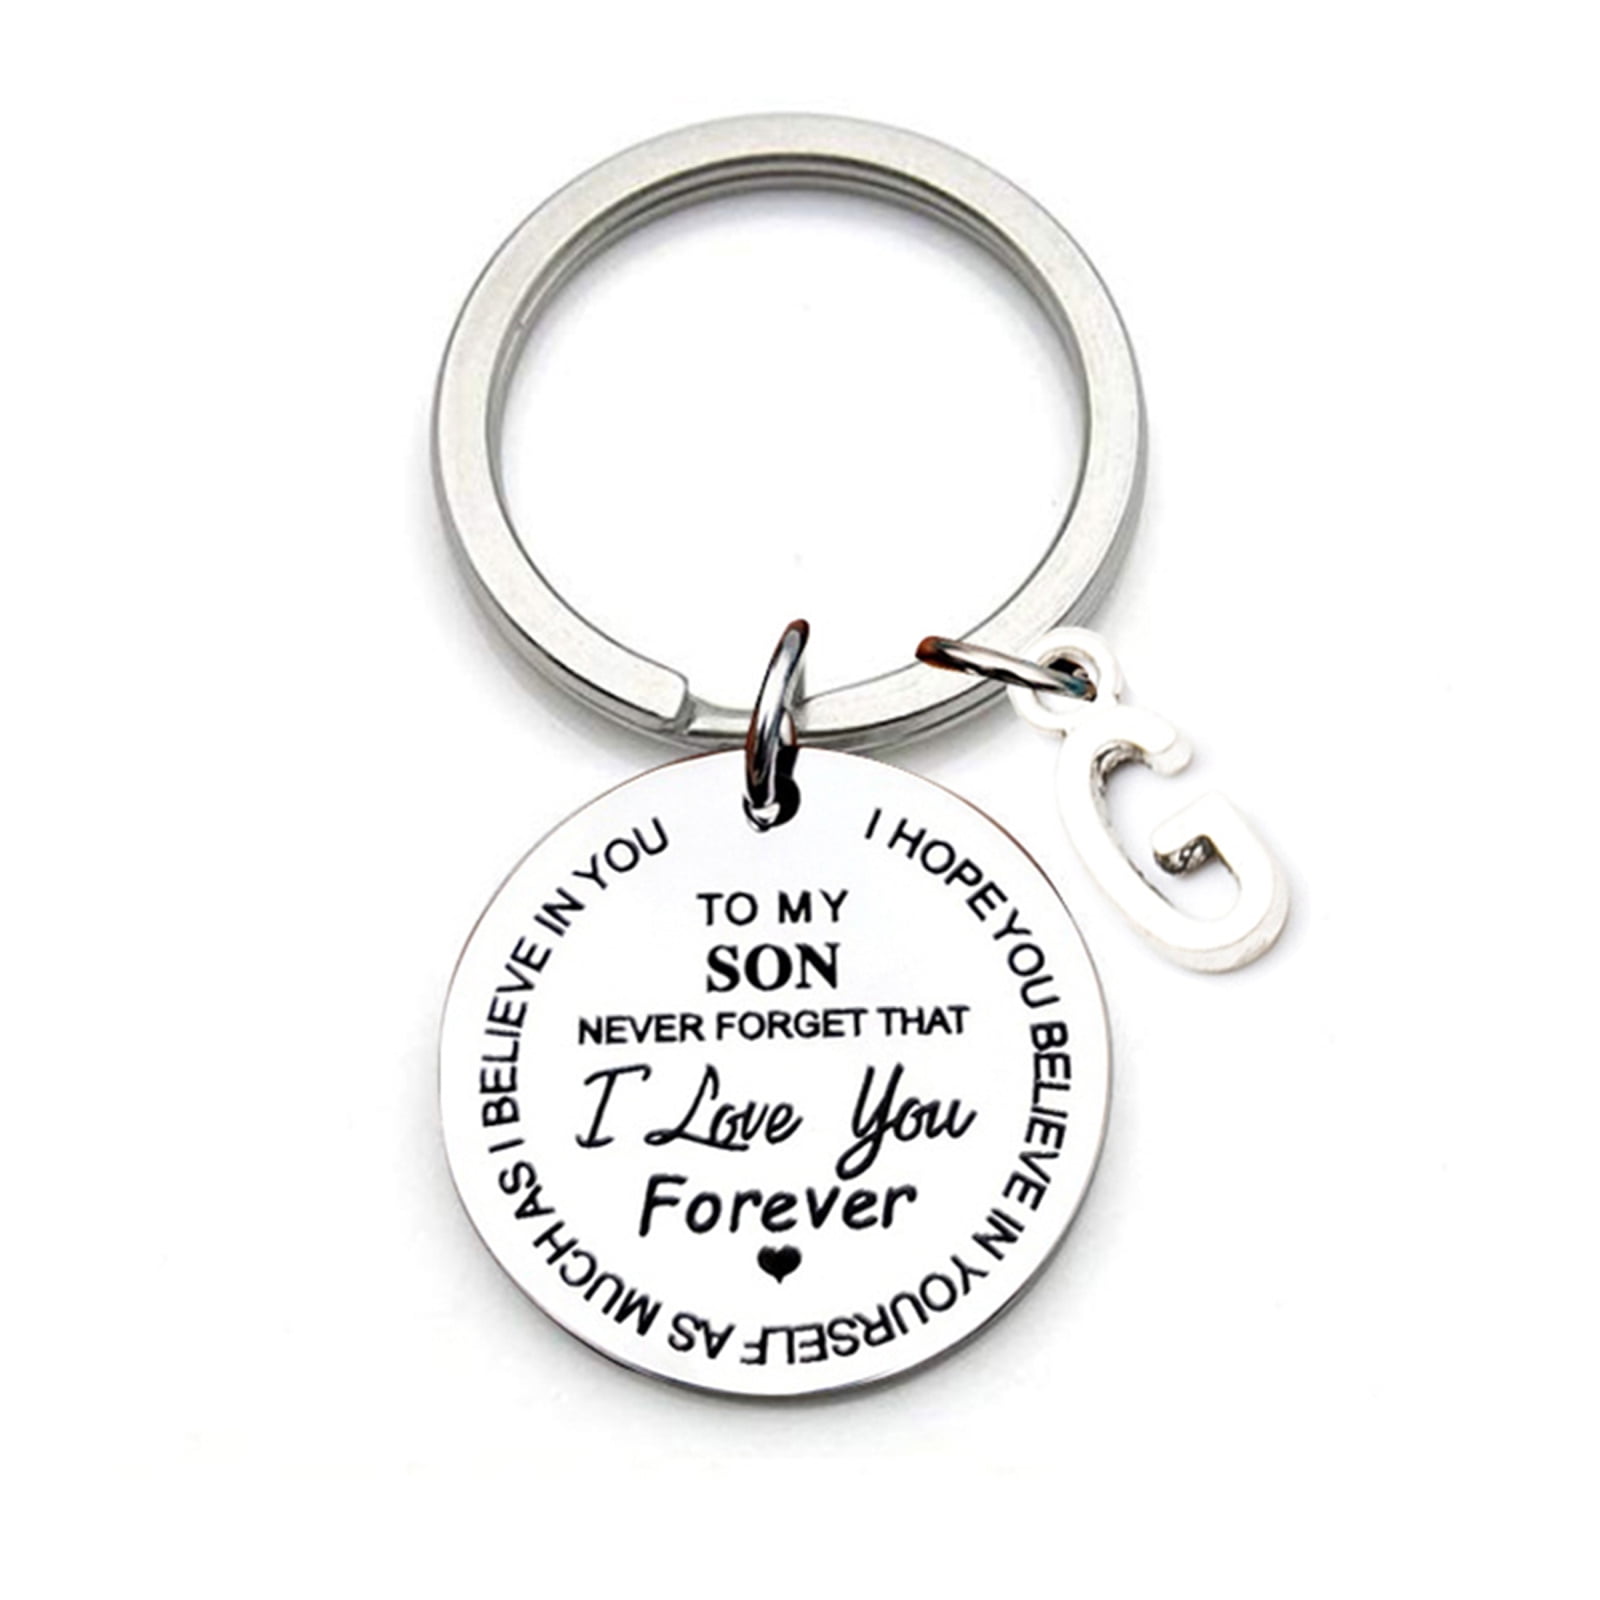 To My Son Key Chain Stronger Charm Family Gifts Key Ring for Kids Sons 